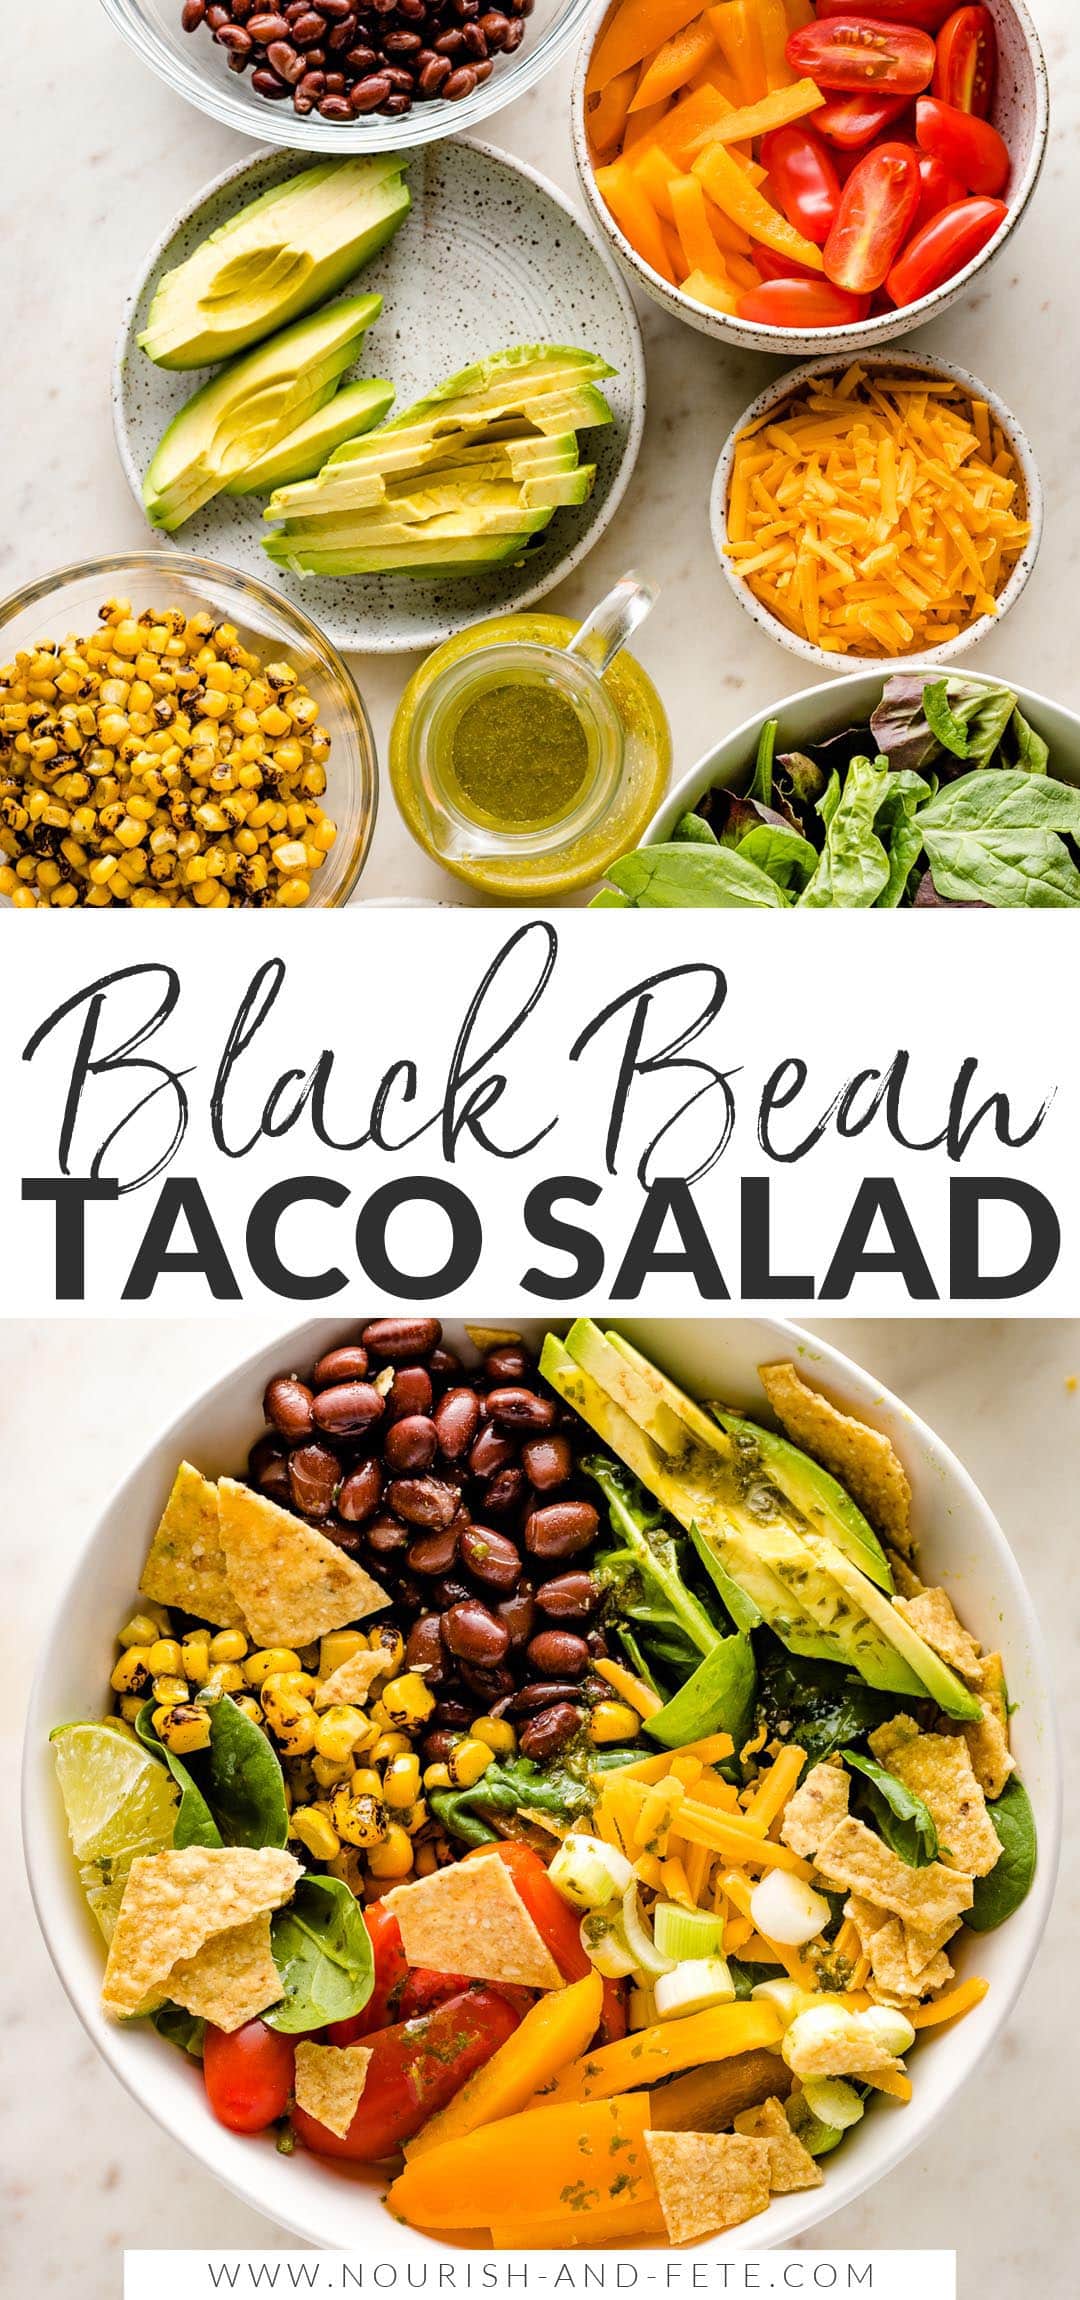 Vegetarian Taco Salad with Black Beans - Nourish and Fete